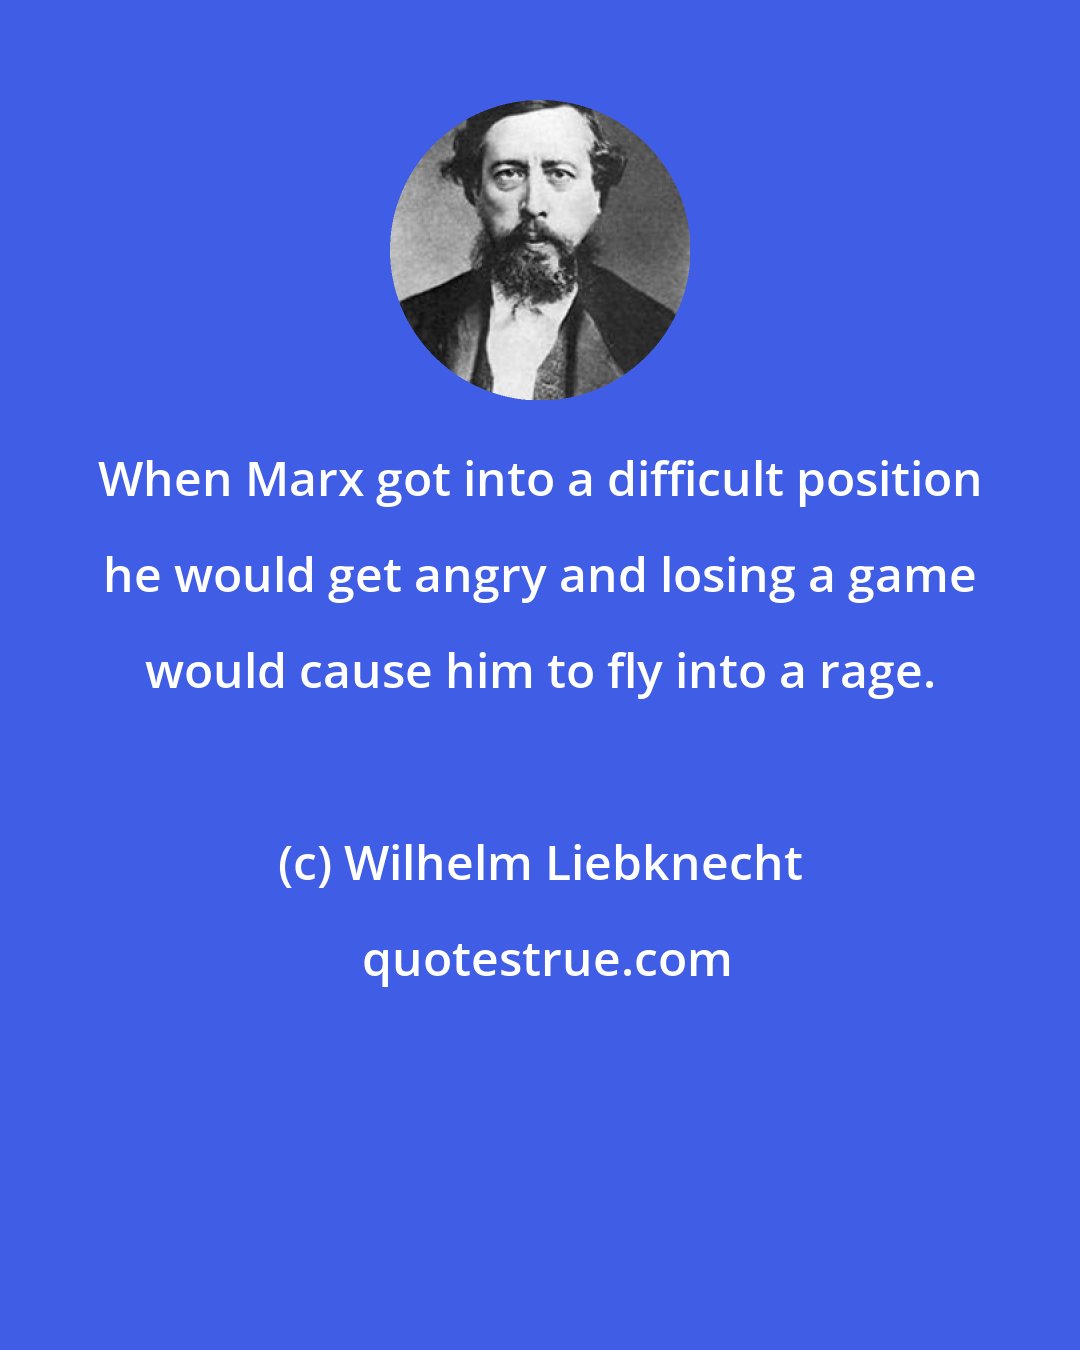 Wilhelm Liebknecht: When Marx got into a difficult position he would get angry and losing a game would cause him to fly into a rage.